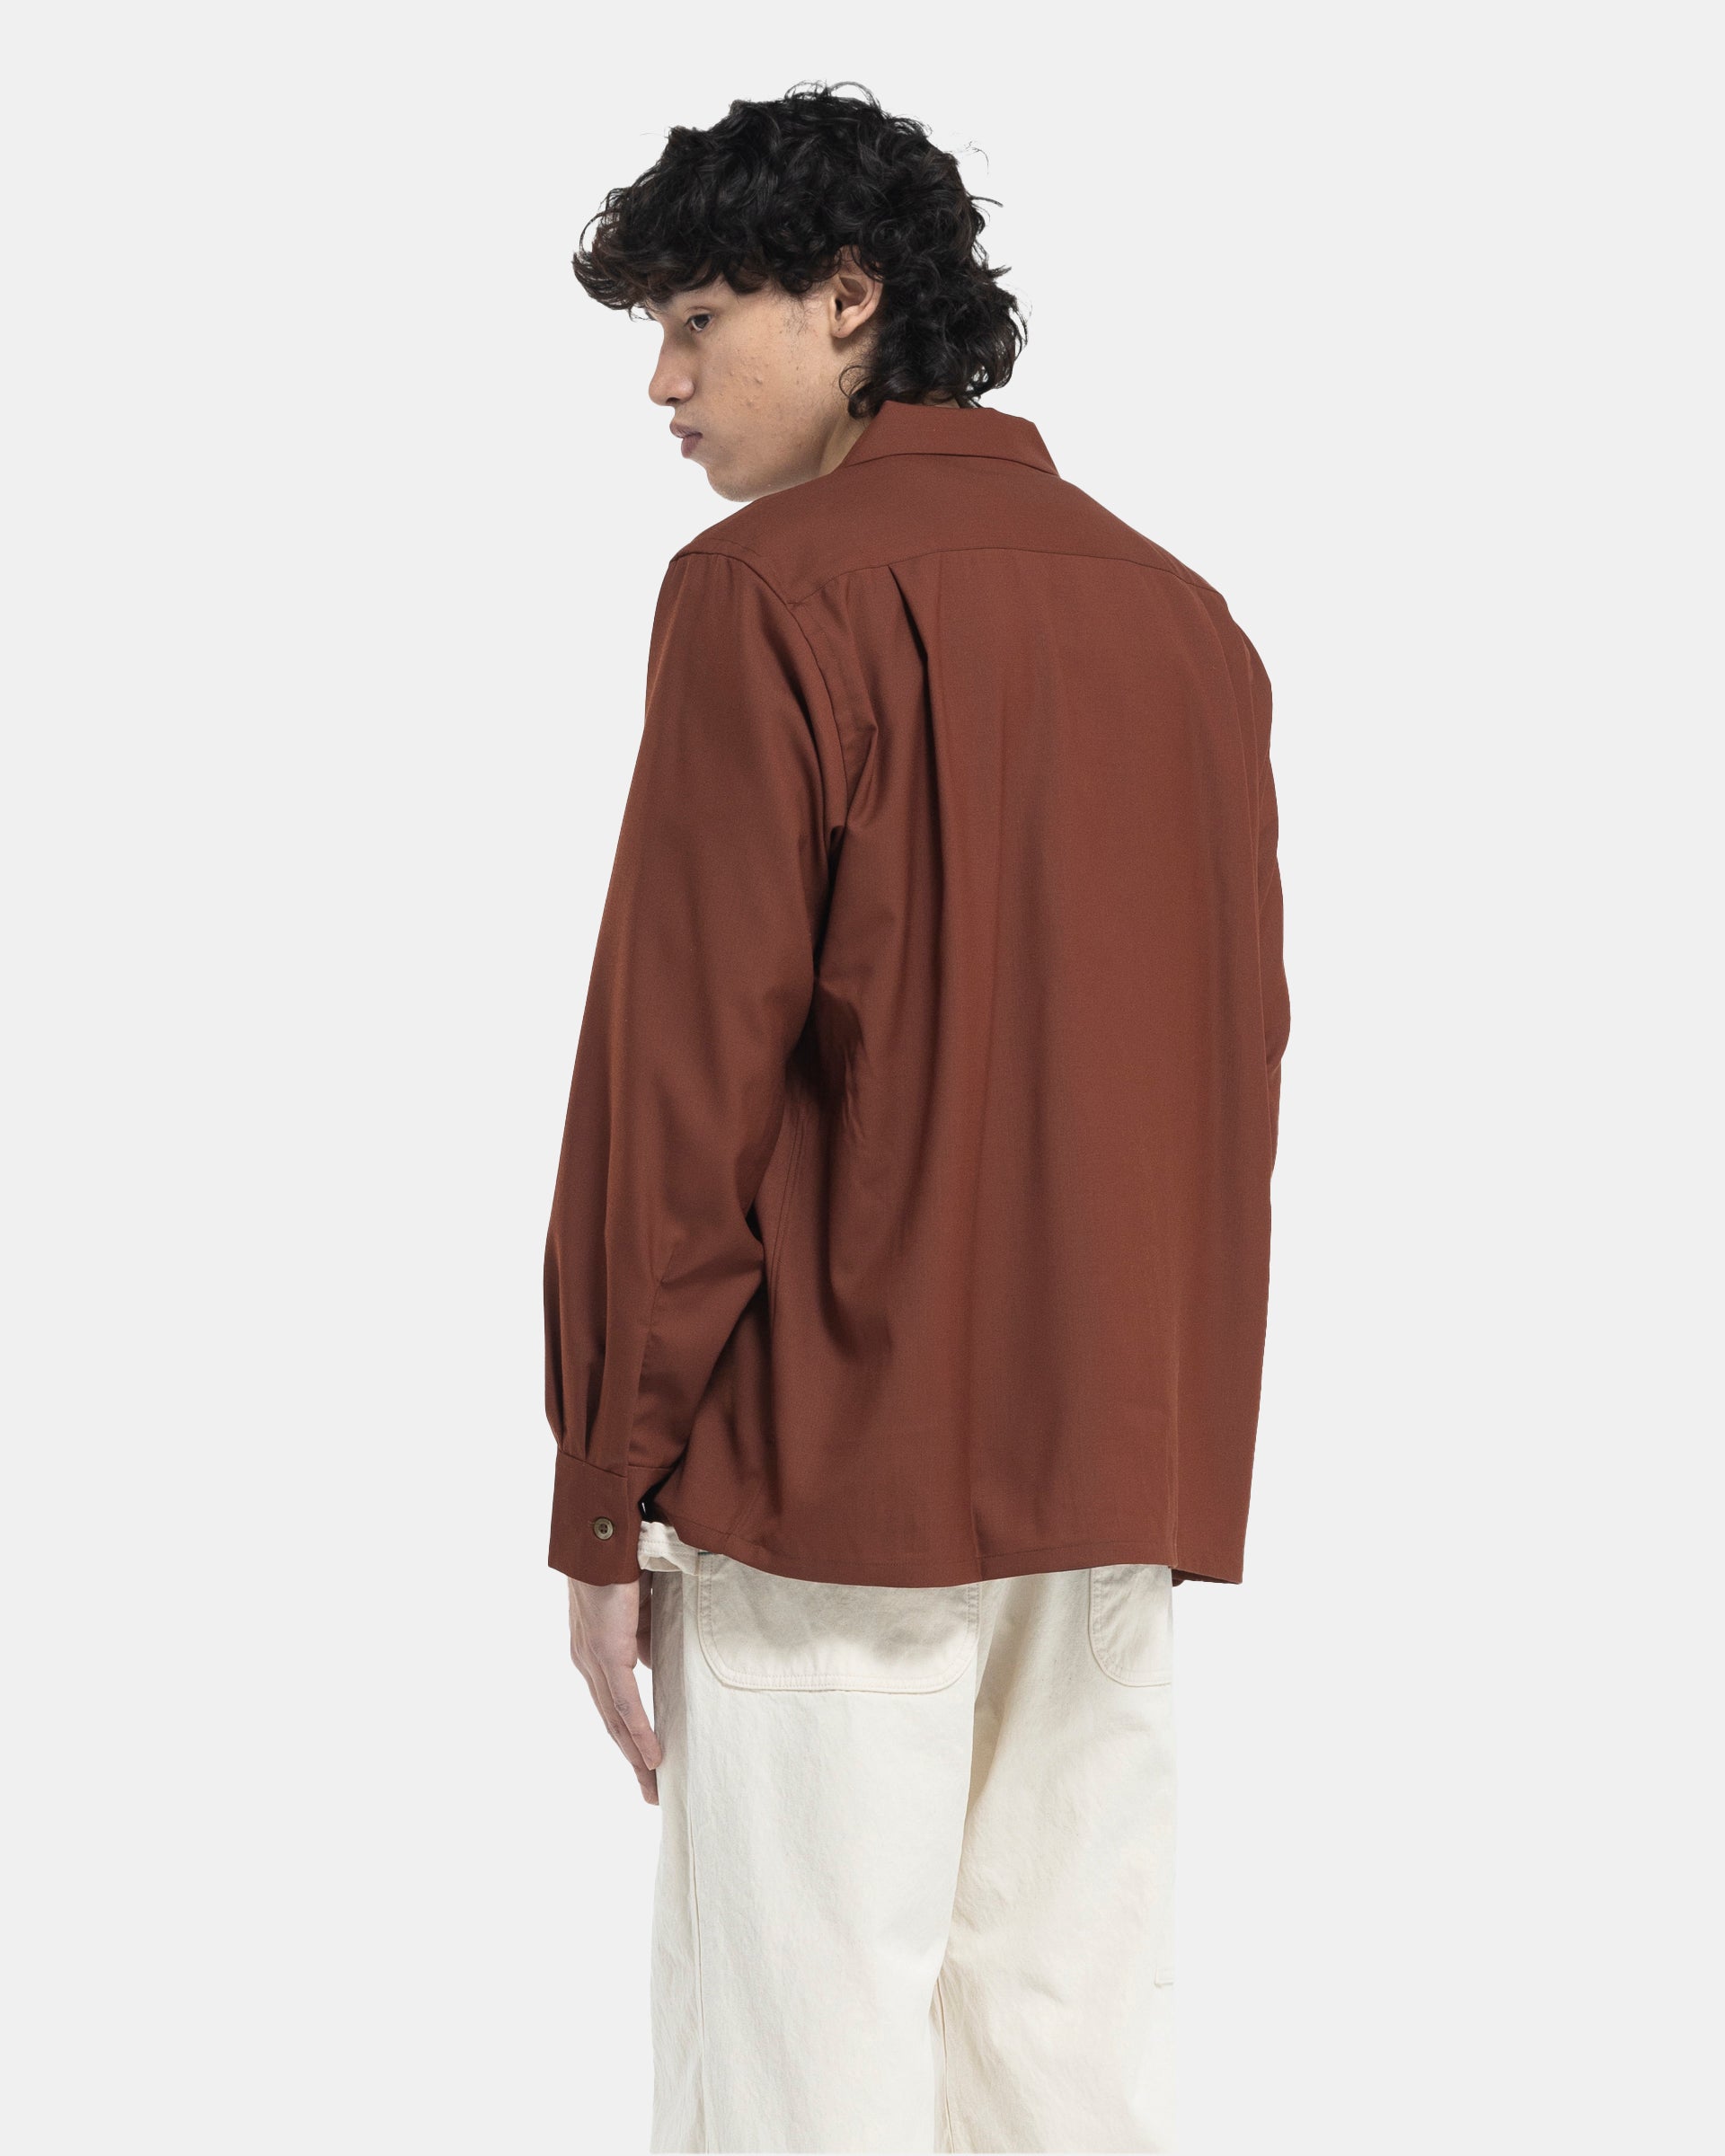 6 Pocket Classic Shirt in Brown